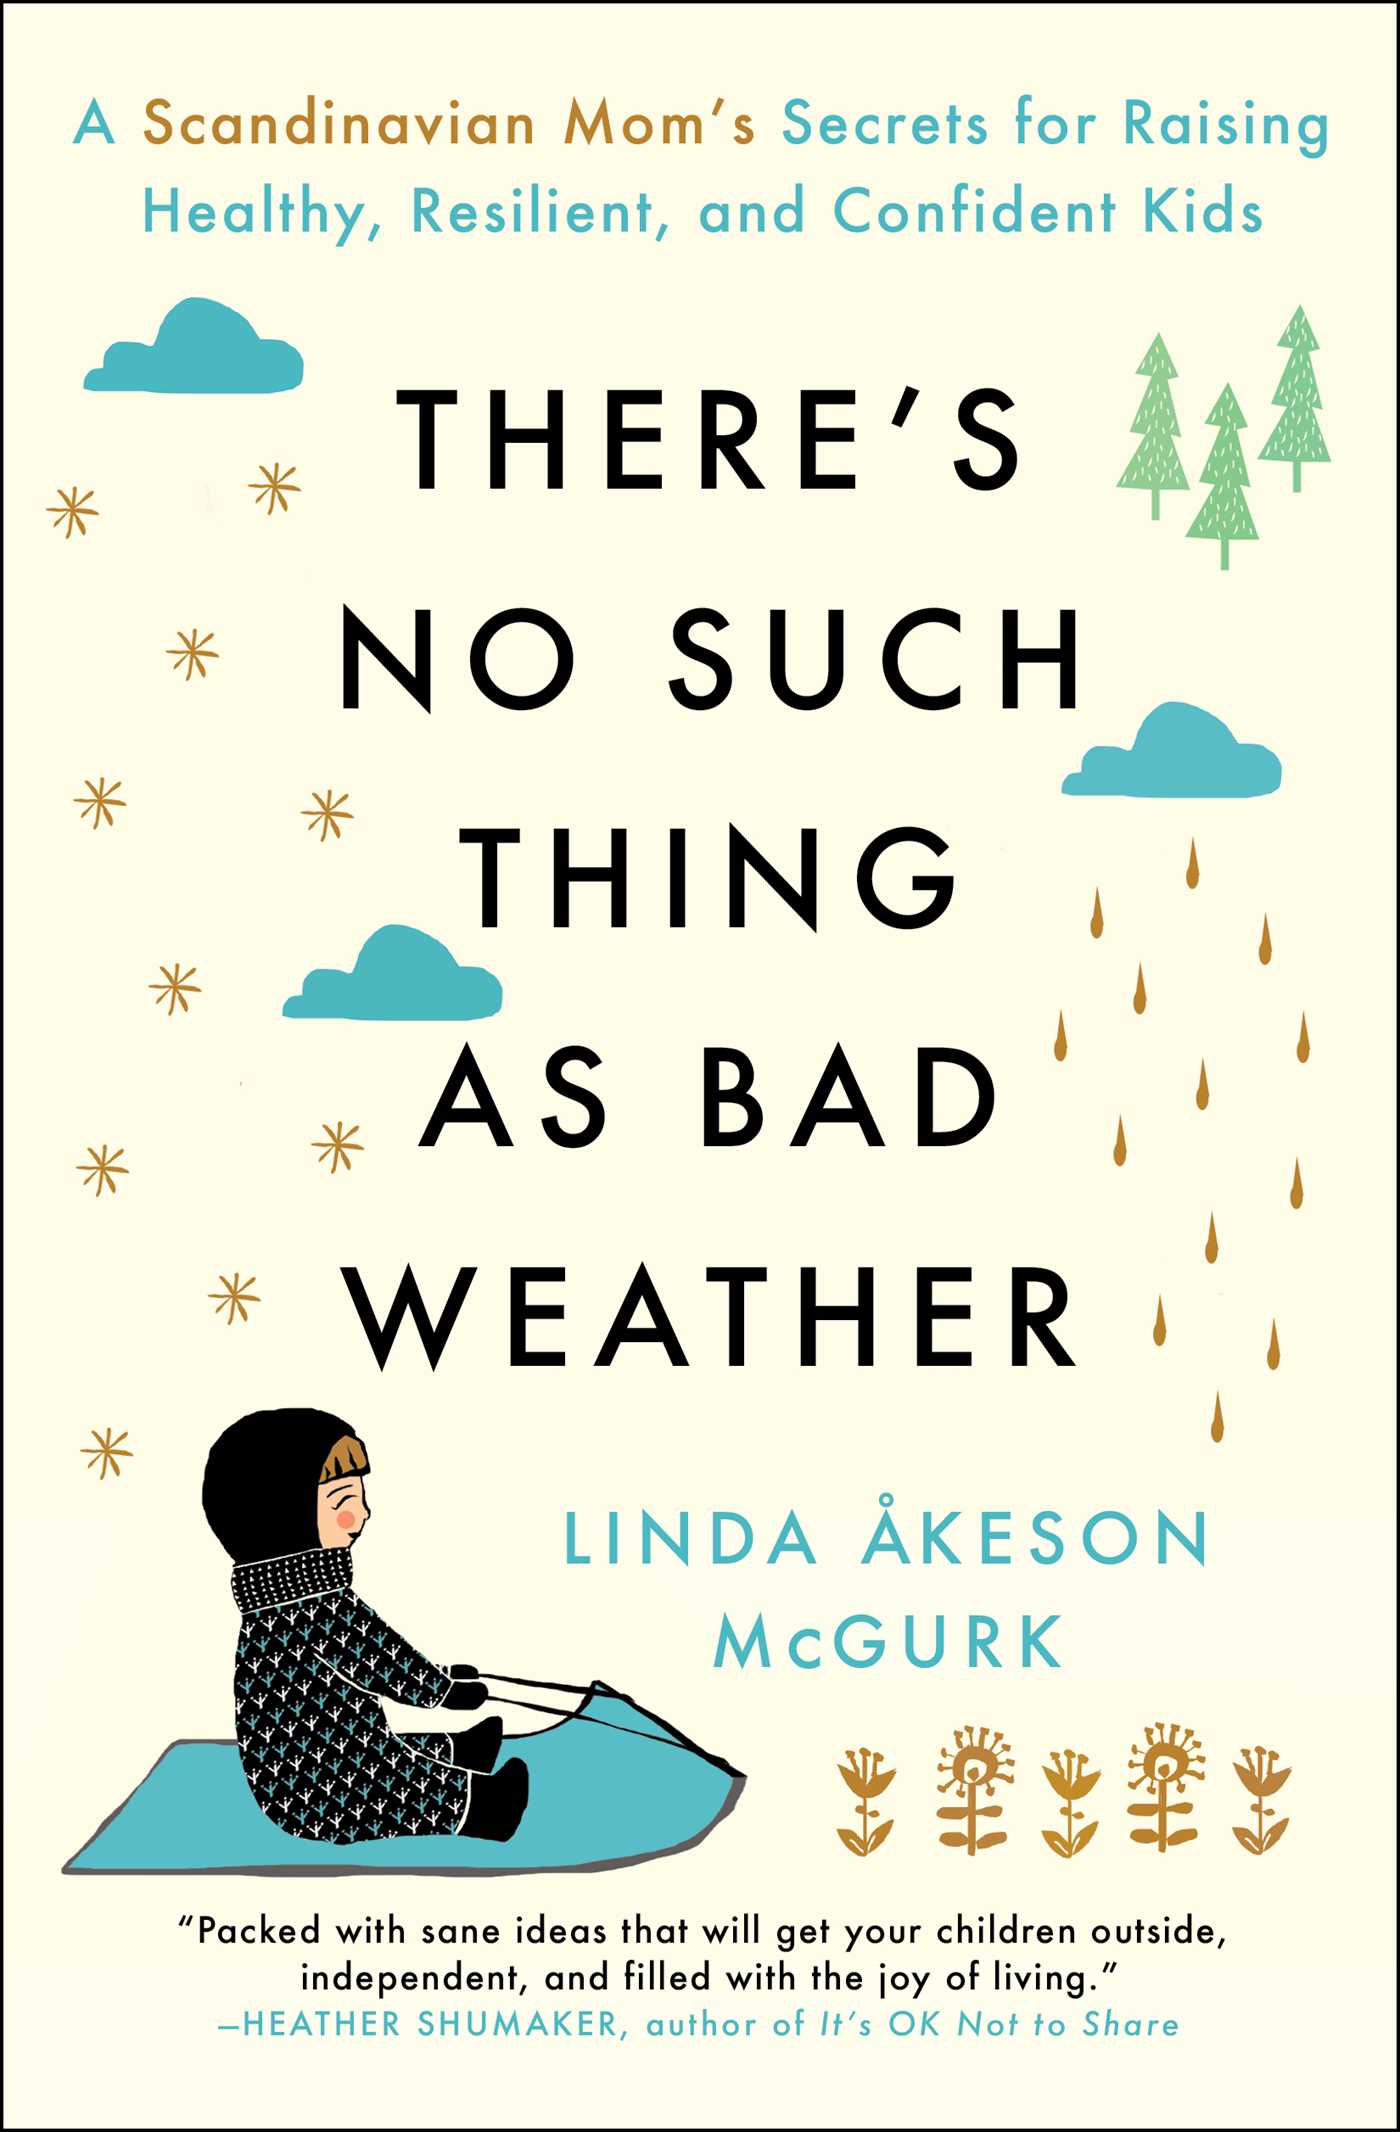 There's No Such Thing as Bad Weather : A Scandinavian Mom's Secrets for Raising Healthy, Resilient, and Confident Kids (from Friluftsliv to Hygge) | McGurk, Linda Åkeson